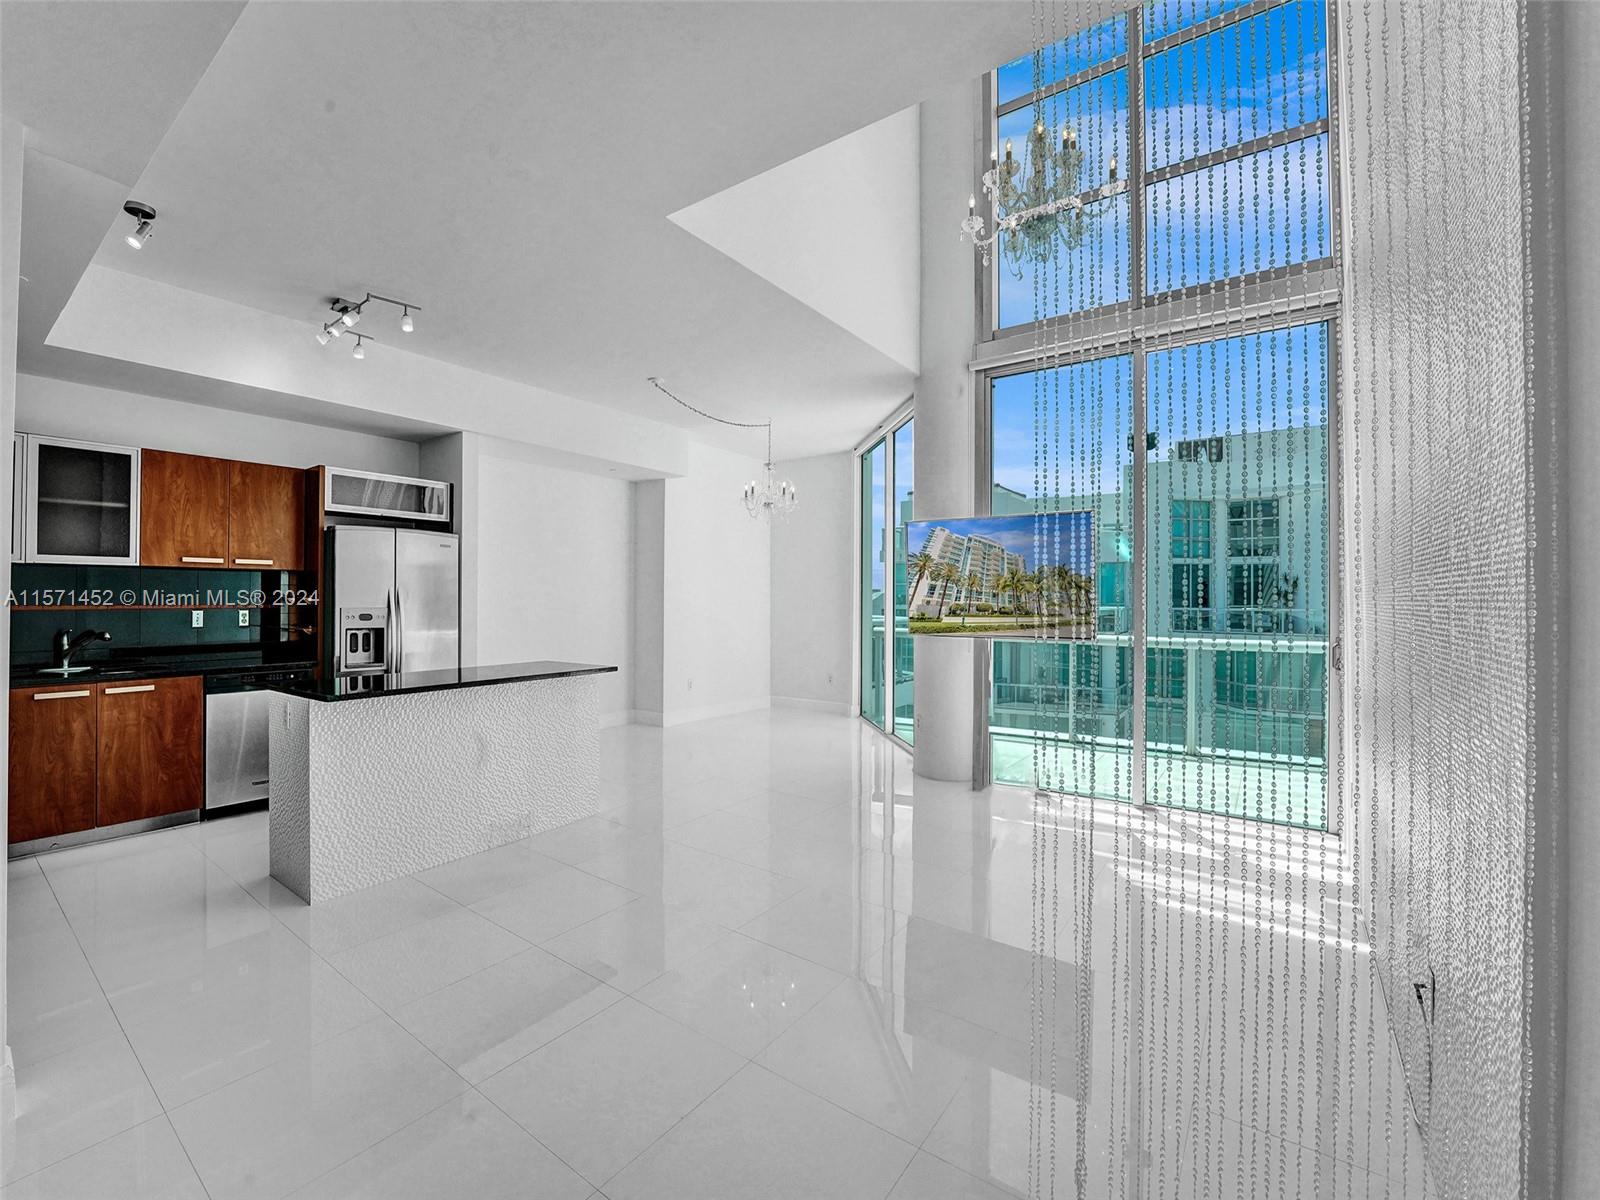 One of the most beautiful Two-Story Penthouse in the Atrium at Aventura. 2 Bedrooms + Den + 3 Full baths+ Roof top terrace. Granite Kitchen countertops, stainless steel. Spectacular water view , Private 500 SF roof top terrace. Full amenities: Valet Parking , Security, Pool, Fitness center, Next to School, Shopping, restaurants, and Beaches.